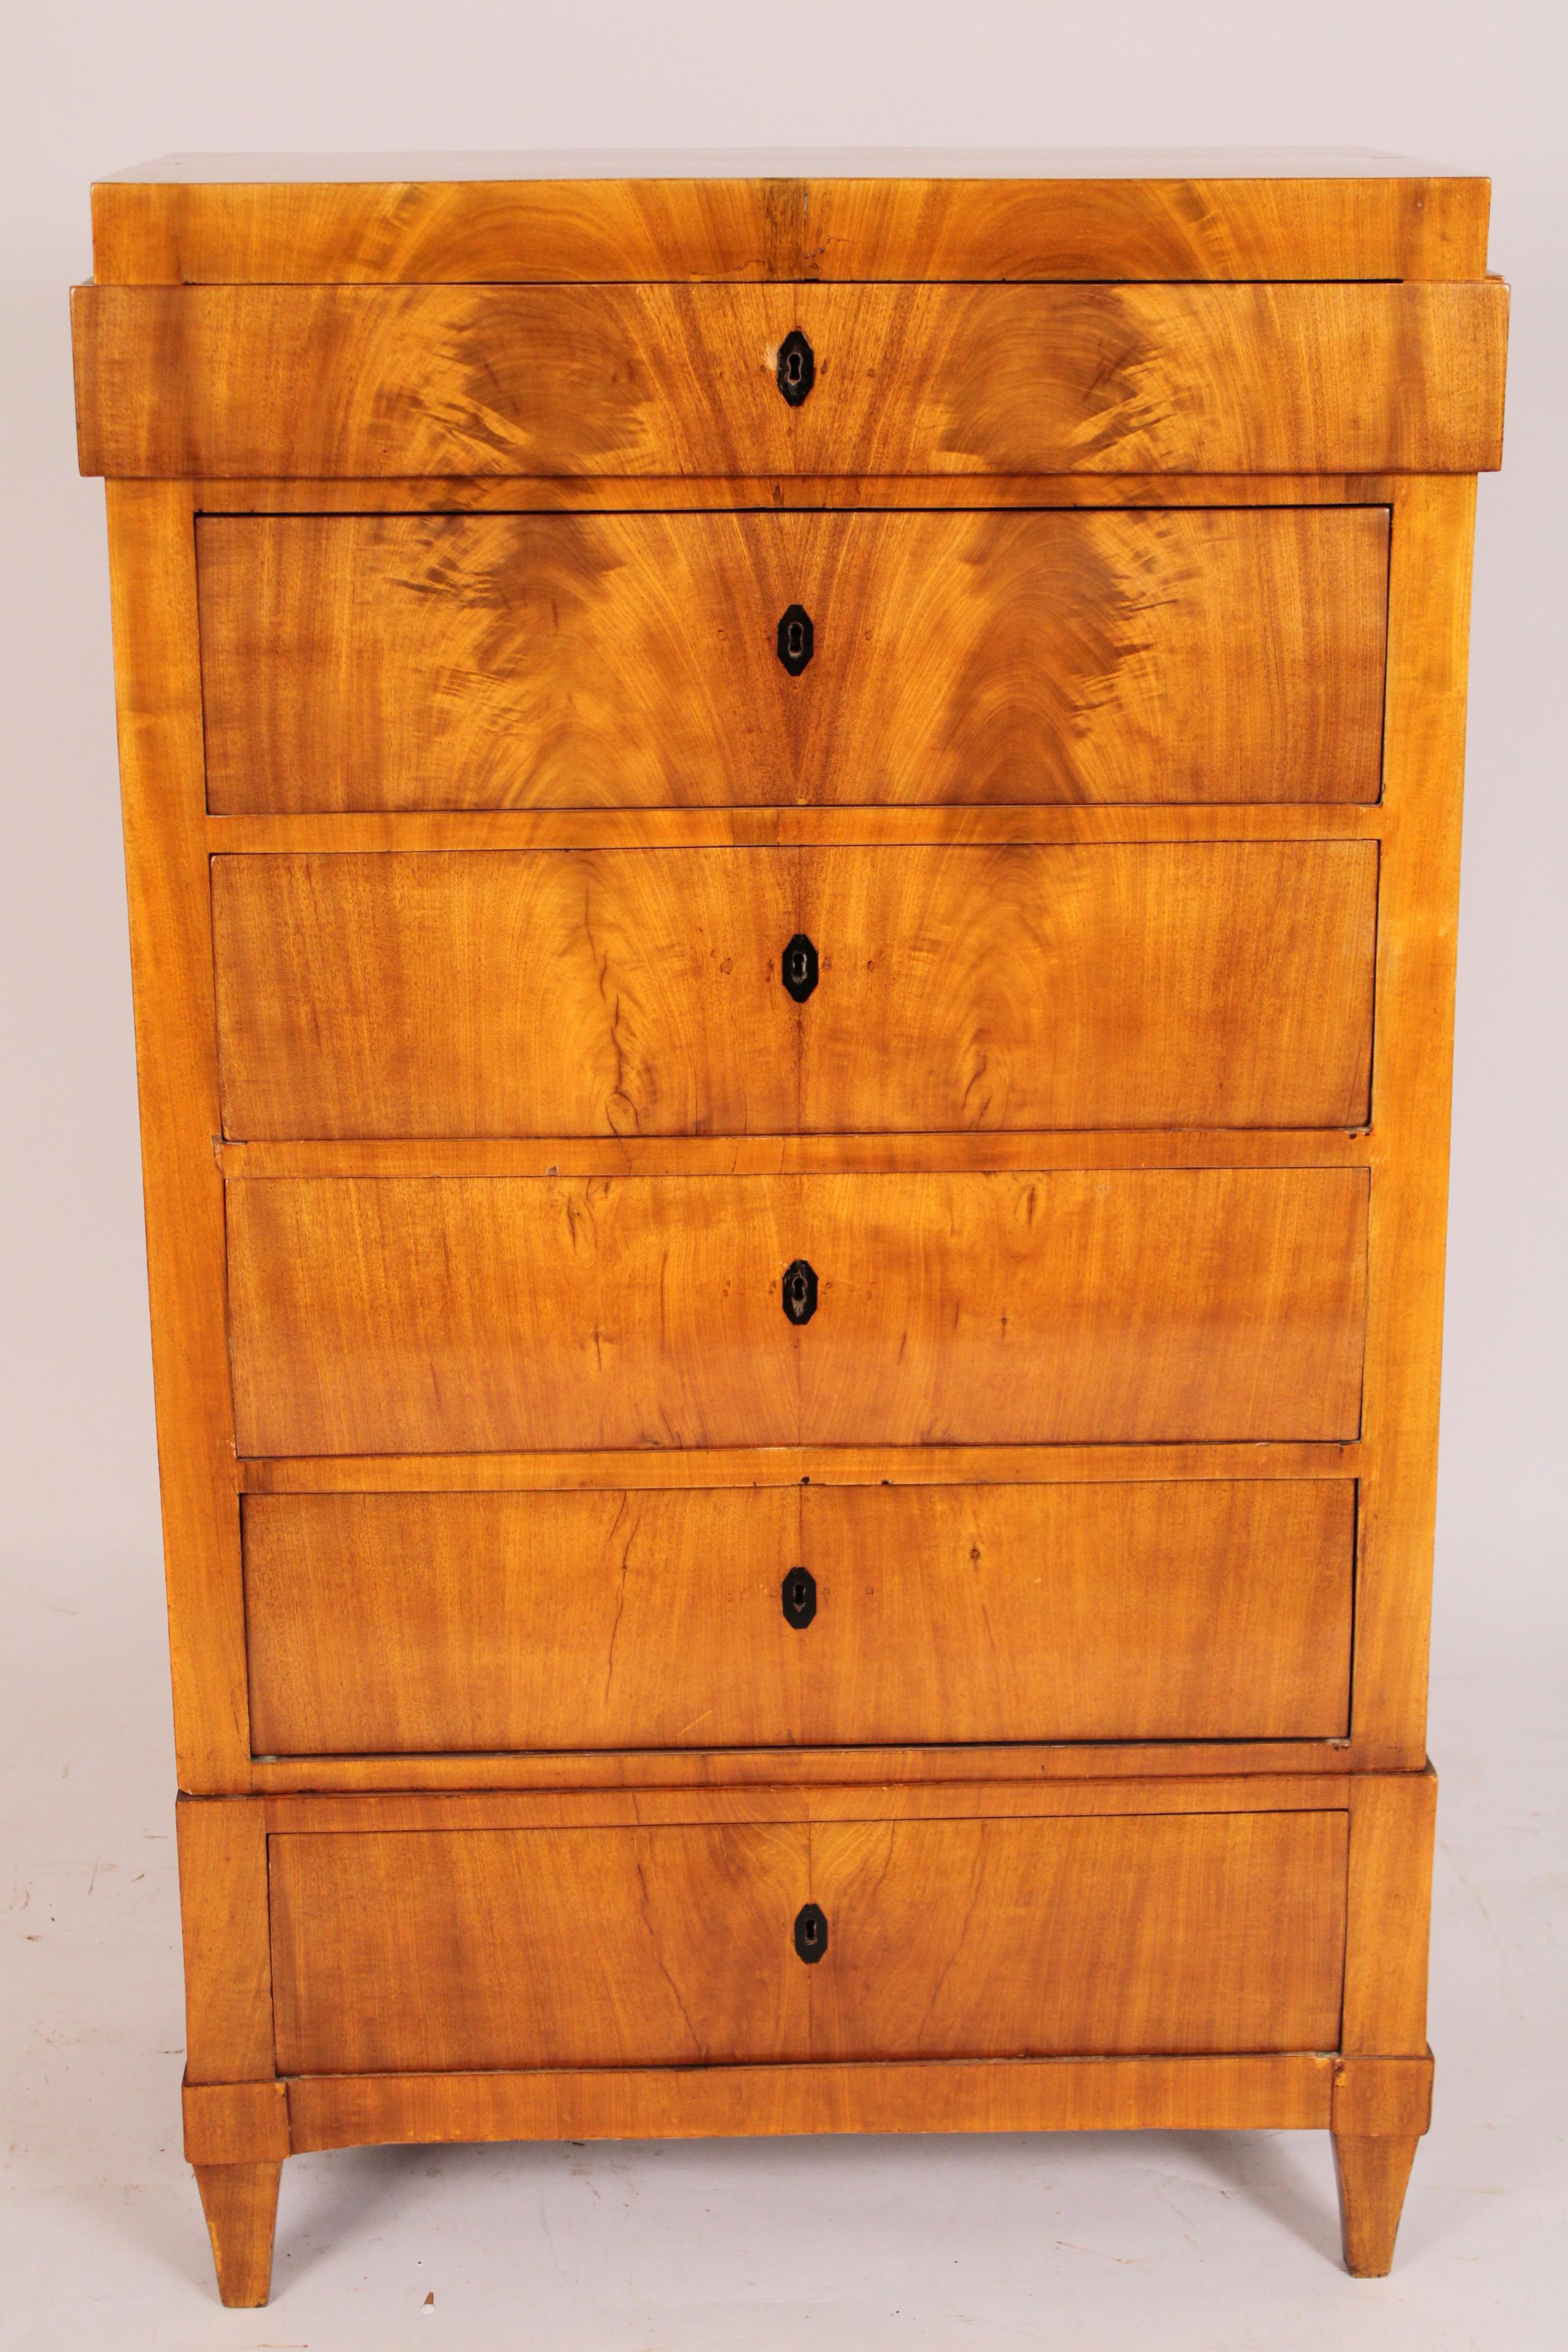 Antique Biedermeier flame mahogany six drawer semanier, circa 1840. With a slightly protruding upper drawer and 5 lower drawers with matching flame grain birch and ebonized escutcheons, resting on square tapered feet. Secondary wood is pine. Hand